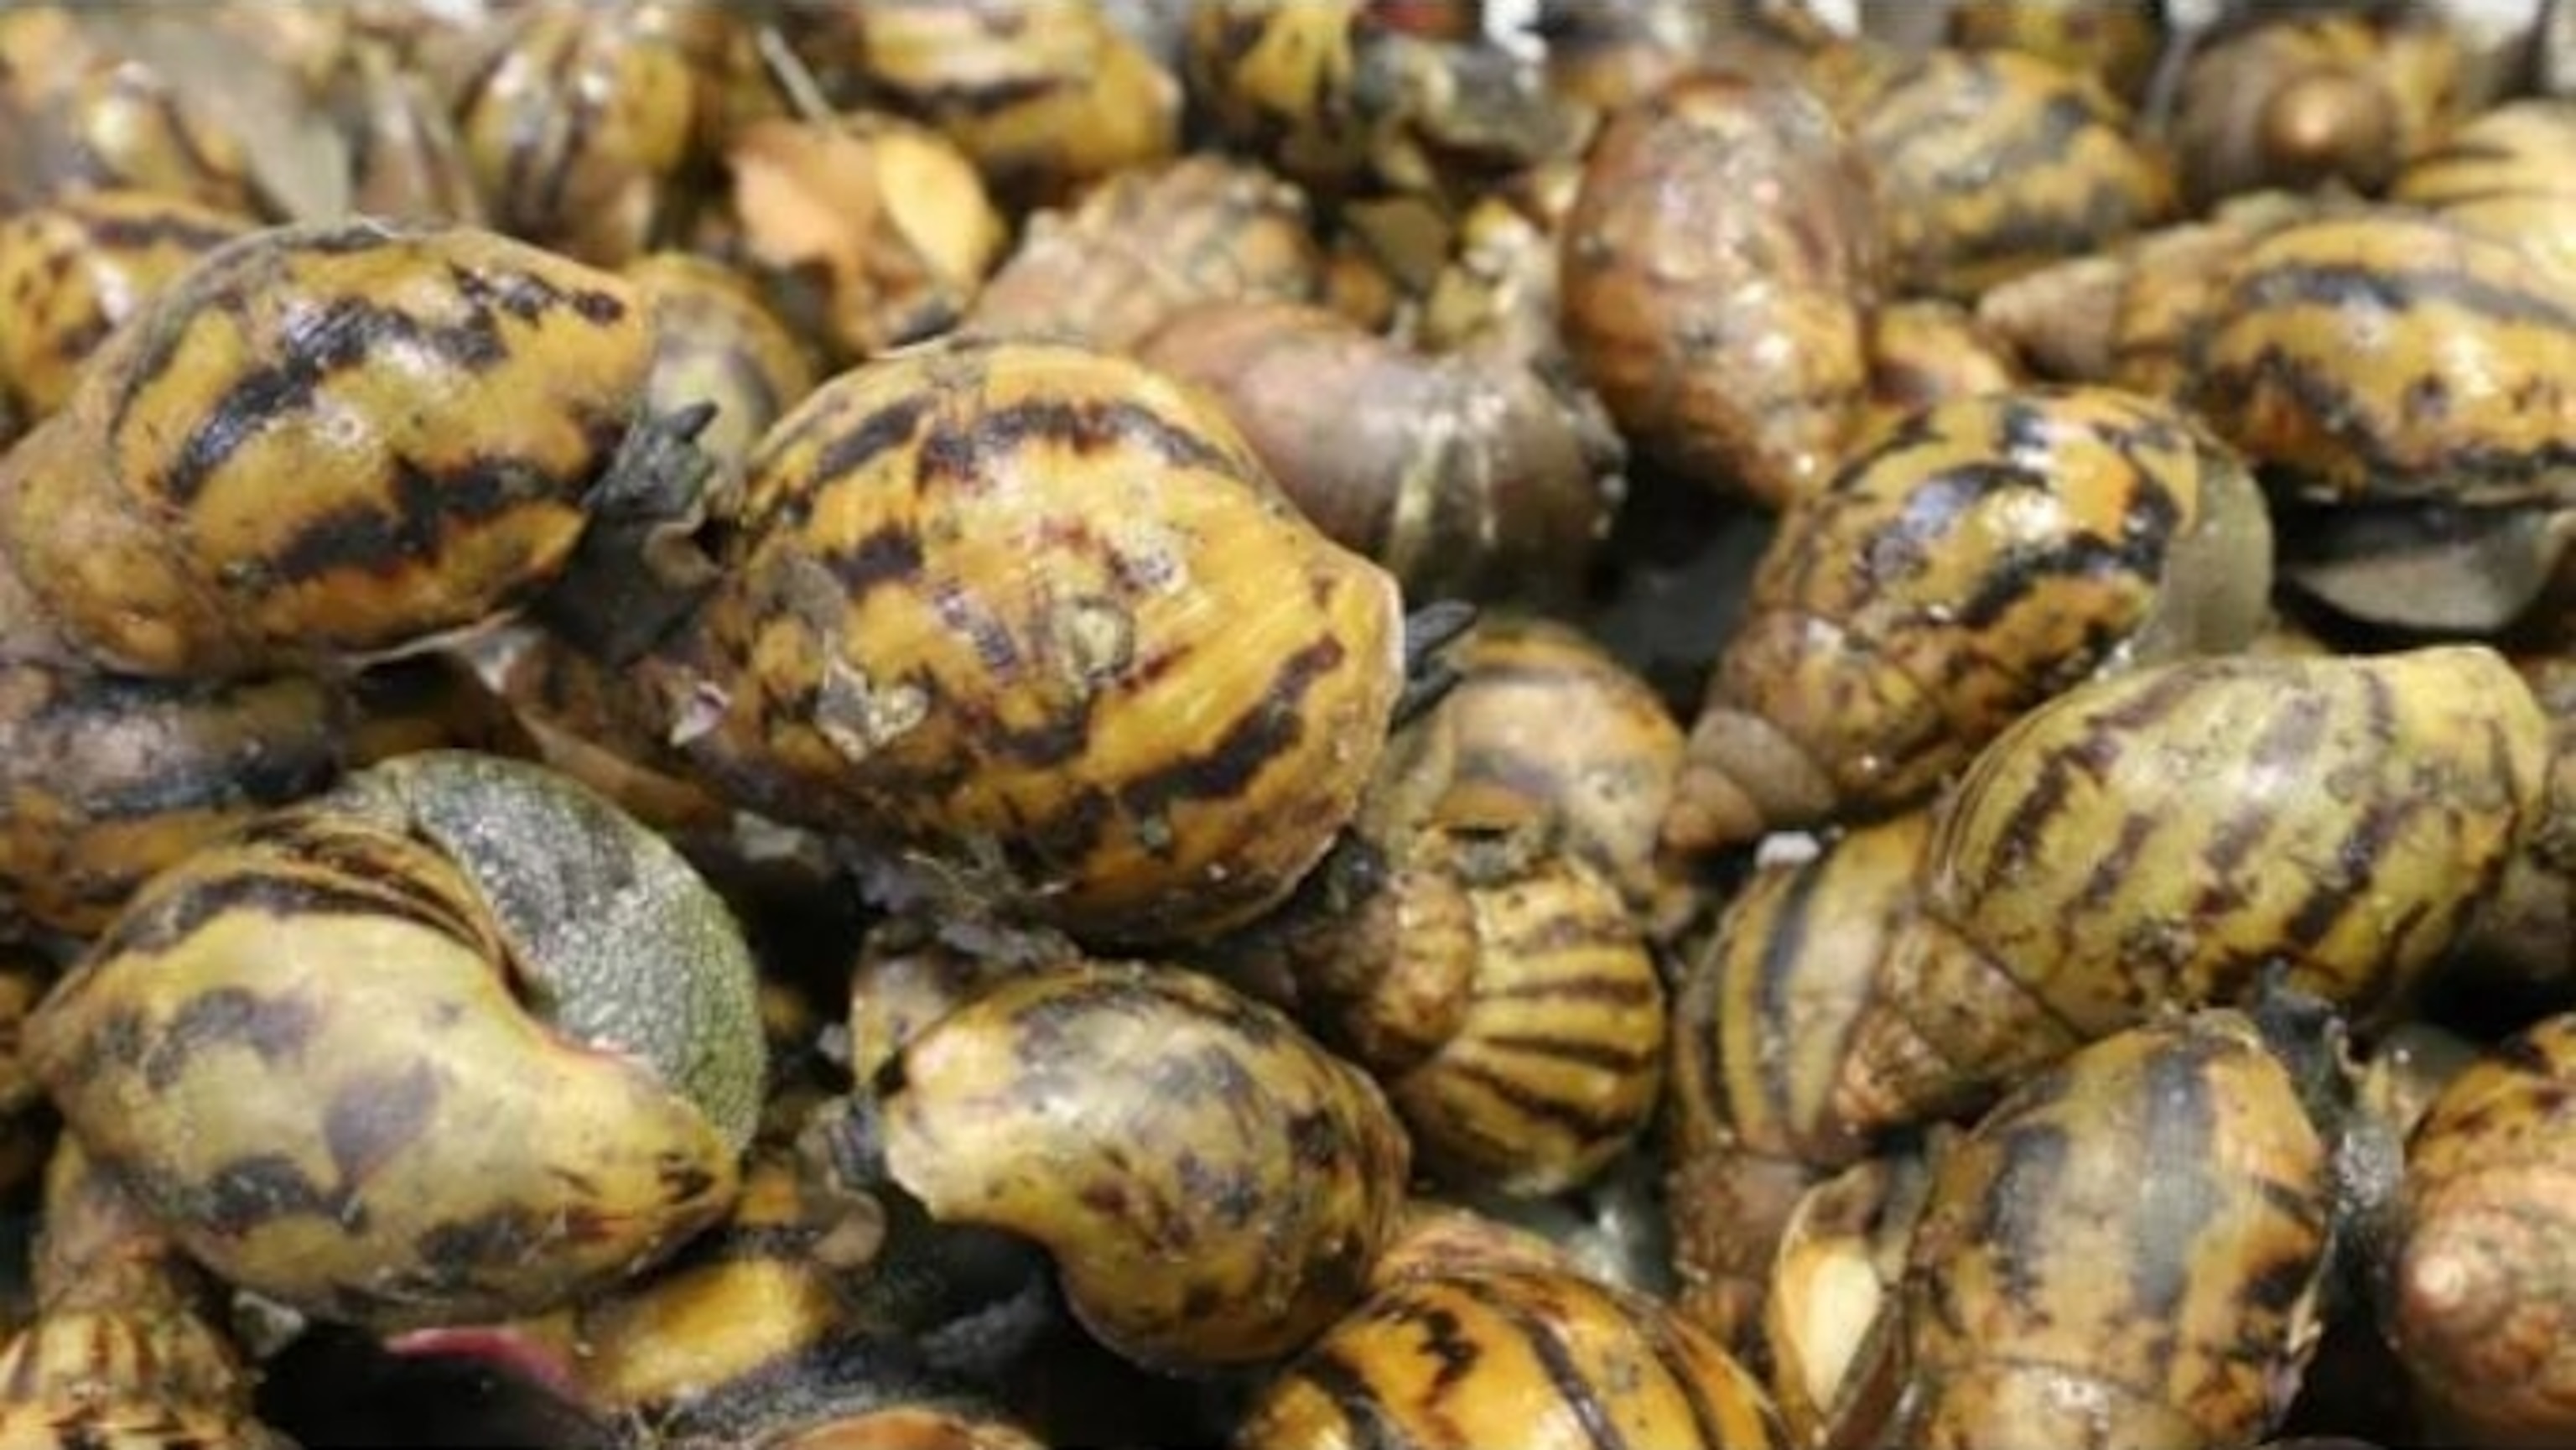 PHOTO: A cache of live snails discovered by CBP at Detroit Metropolitan Airport after a passenger arriving from Ghana was referred for a secondary examination after declaring various fresh food items. 